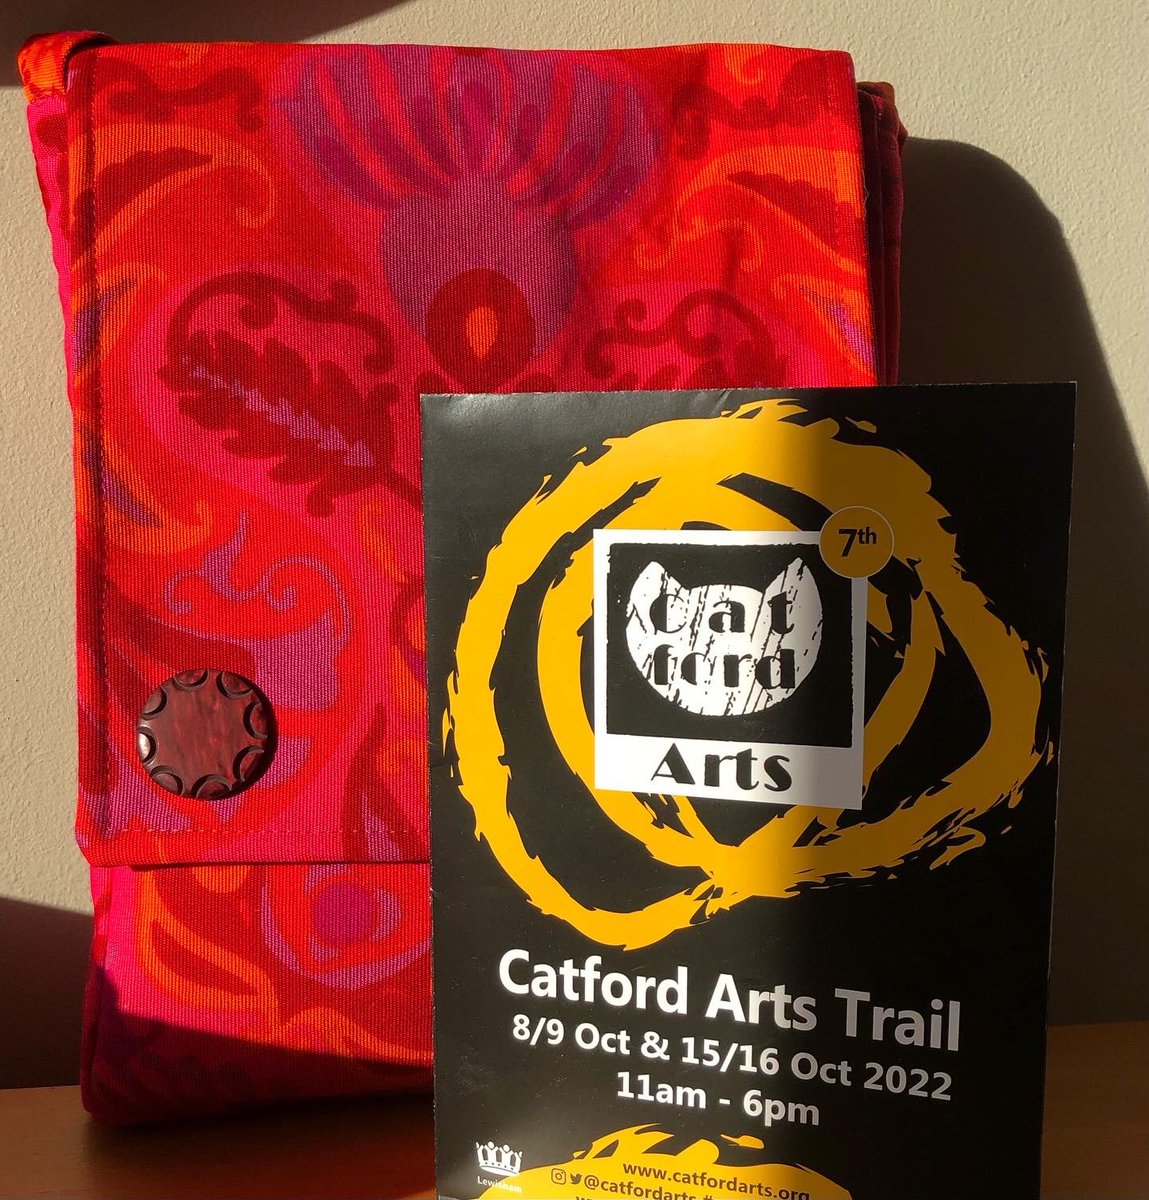 New Messenger Bags all ready for #catfordartstrail which is on over the next couple of weekends. You’ll find me at Venue 47, The Talent Factory and loads of other artists and designers at various venues across #SE6 #localtalent #followthetrail #supportlocal #dontmissit